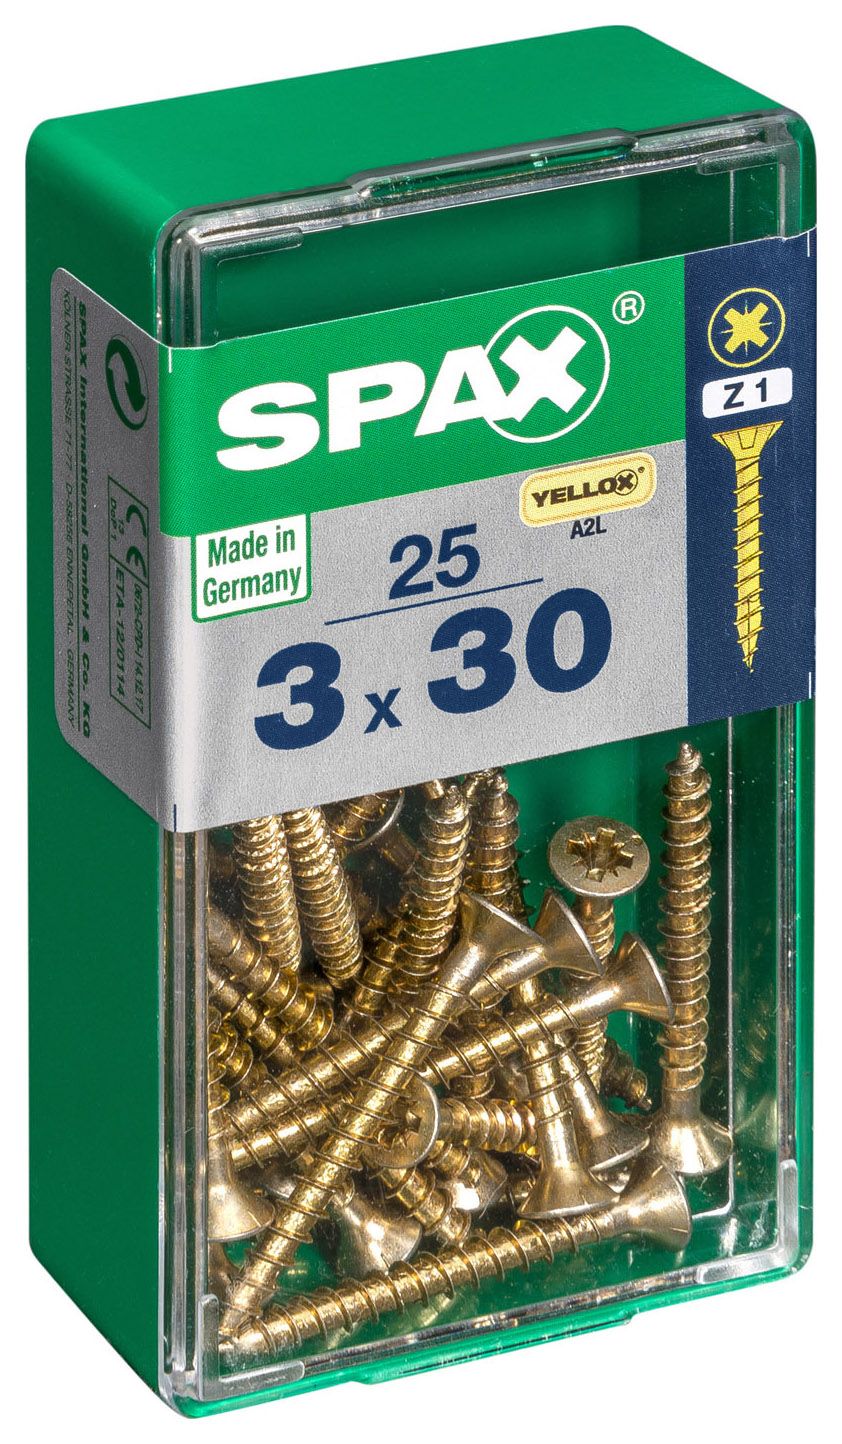 Image of Spax PZ Countersunk Zinc Yellow Screws - 3 x 30mm Pack of 25